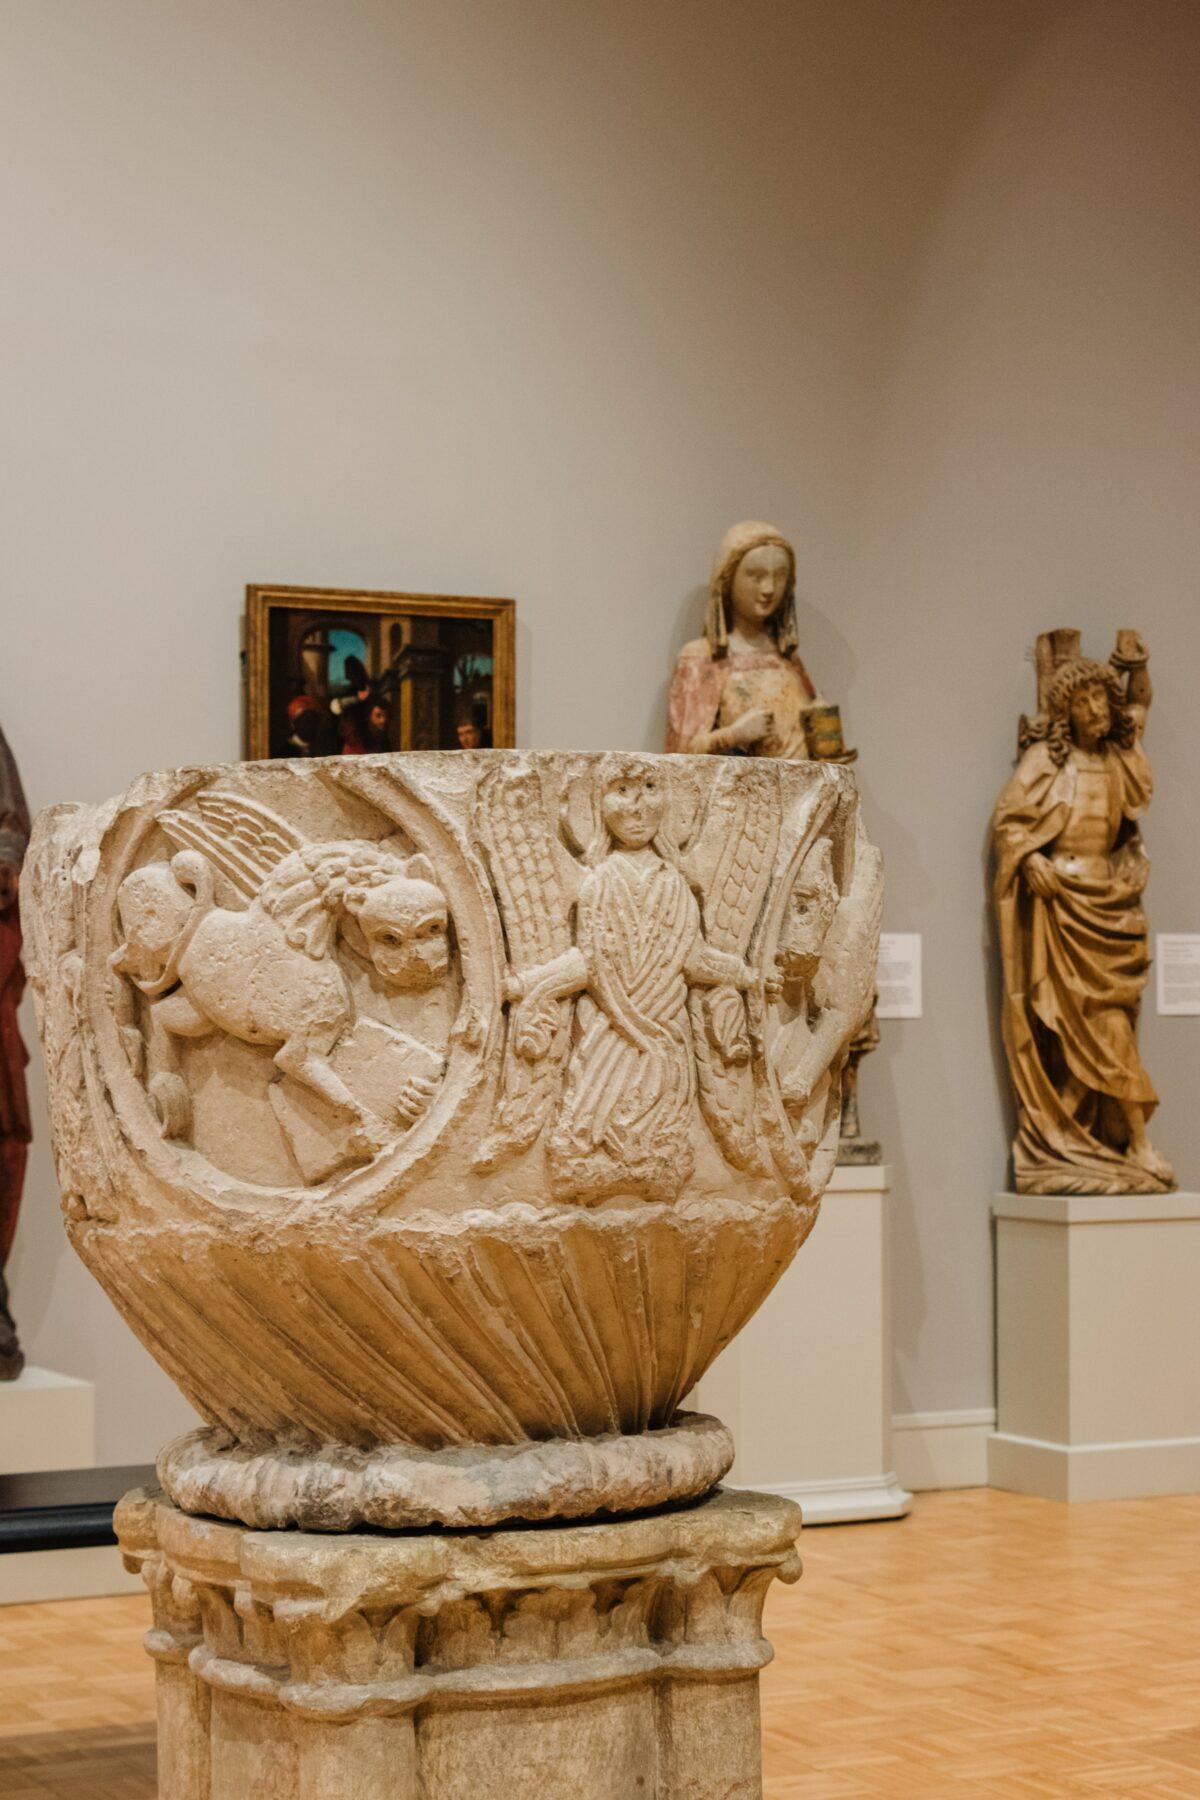 A 12th-century Italian baptismal font at the Memorial Art Gallery in Rochester, N.Y. (Dennis Lennox)